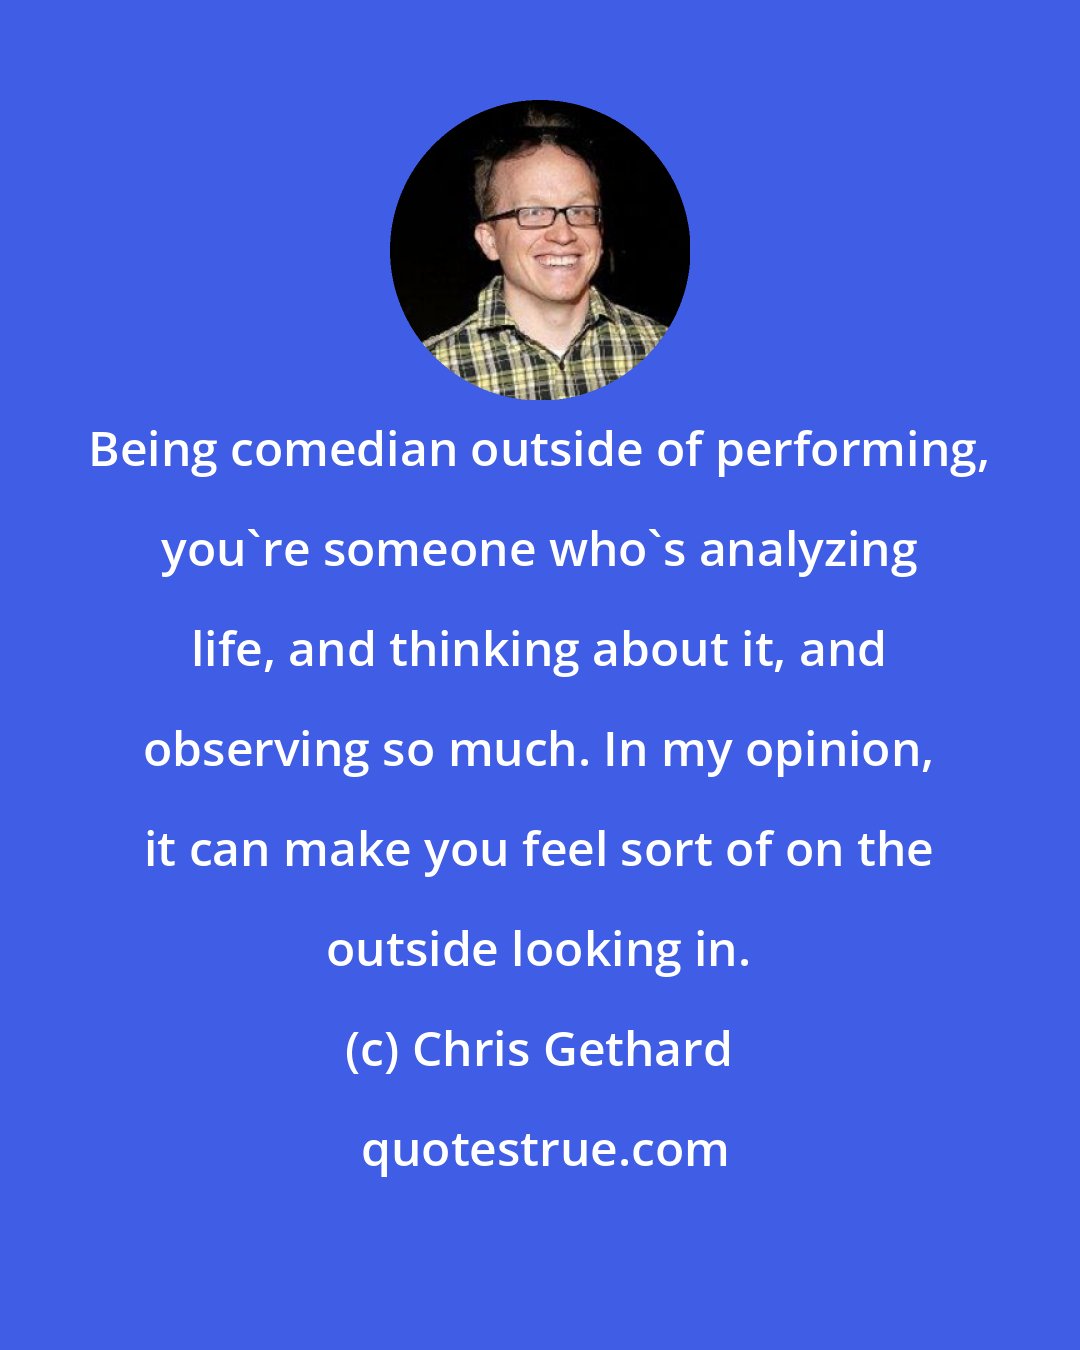 Chris Gethard: Being comedian outside of performing, you're someone who's analyzing life, and thinking about it, and observing so much. In my opinion, it can make you feel sort of on the outside looking in.